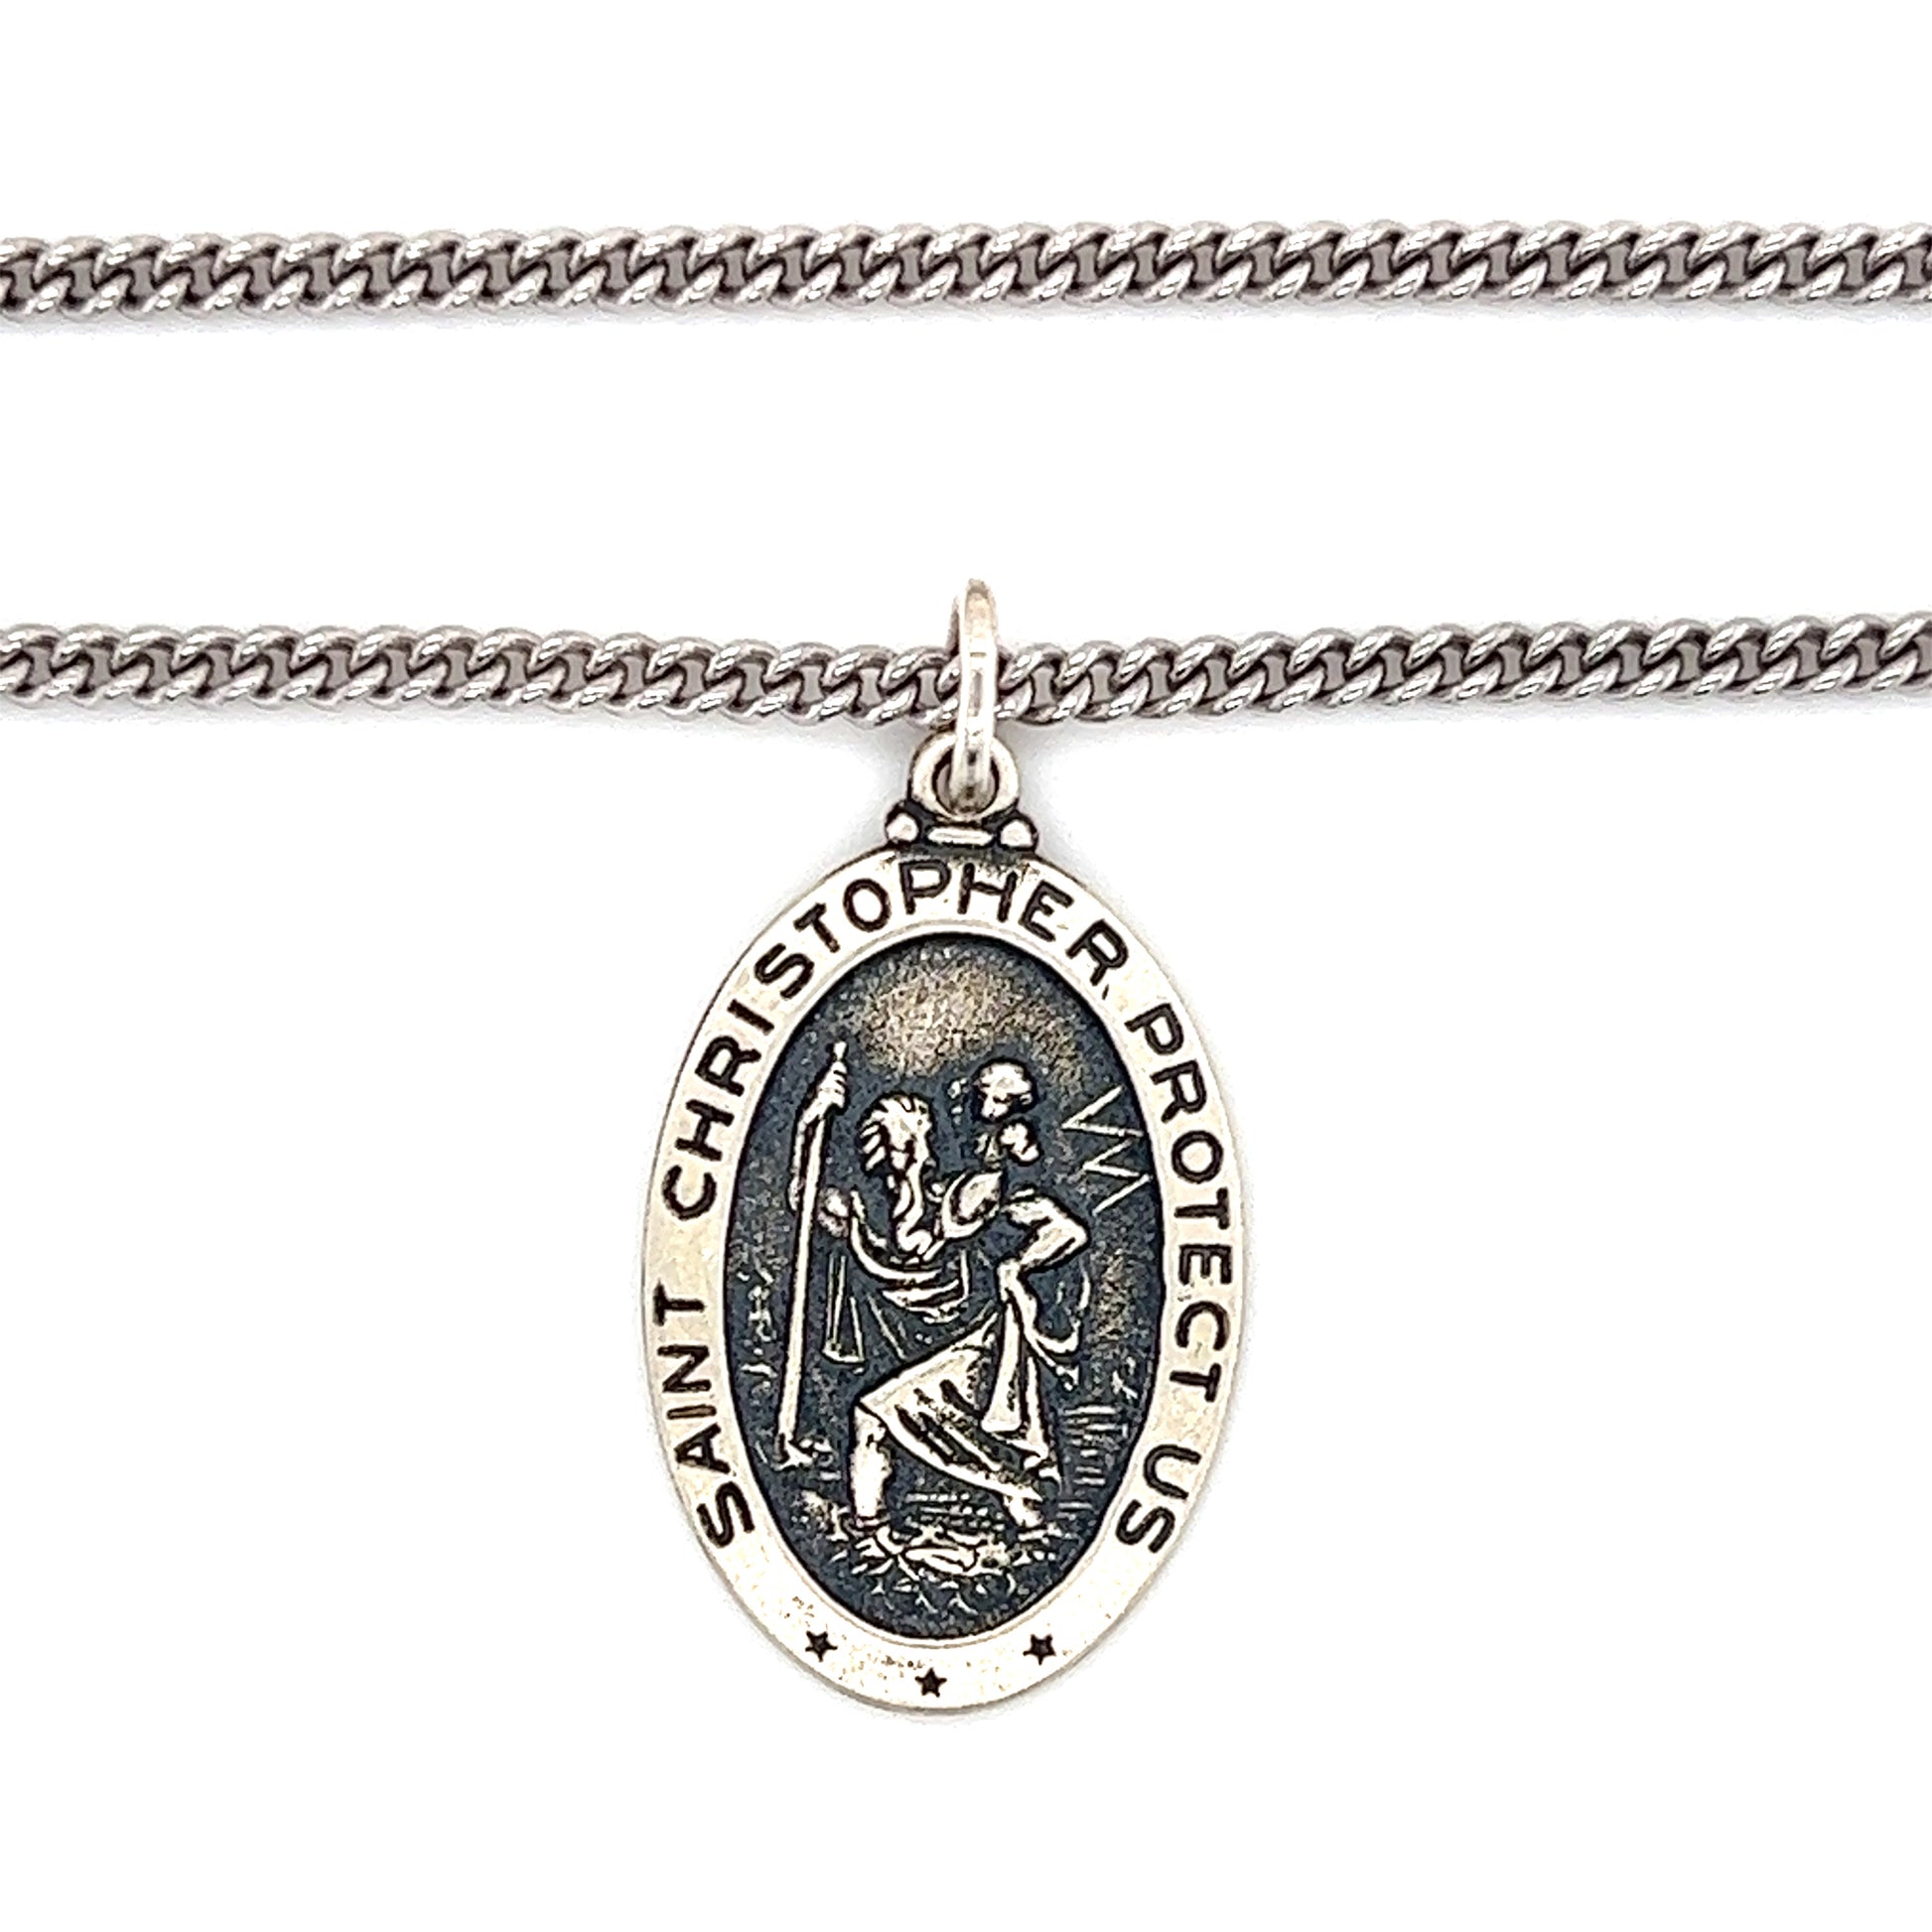 St. Christopher Necklace with Continuous Cable Chain in Sterling Silver Pendant and Chain View